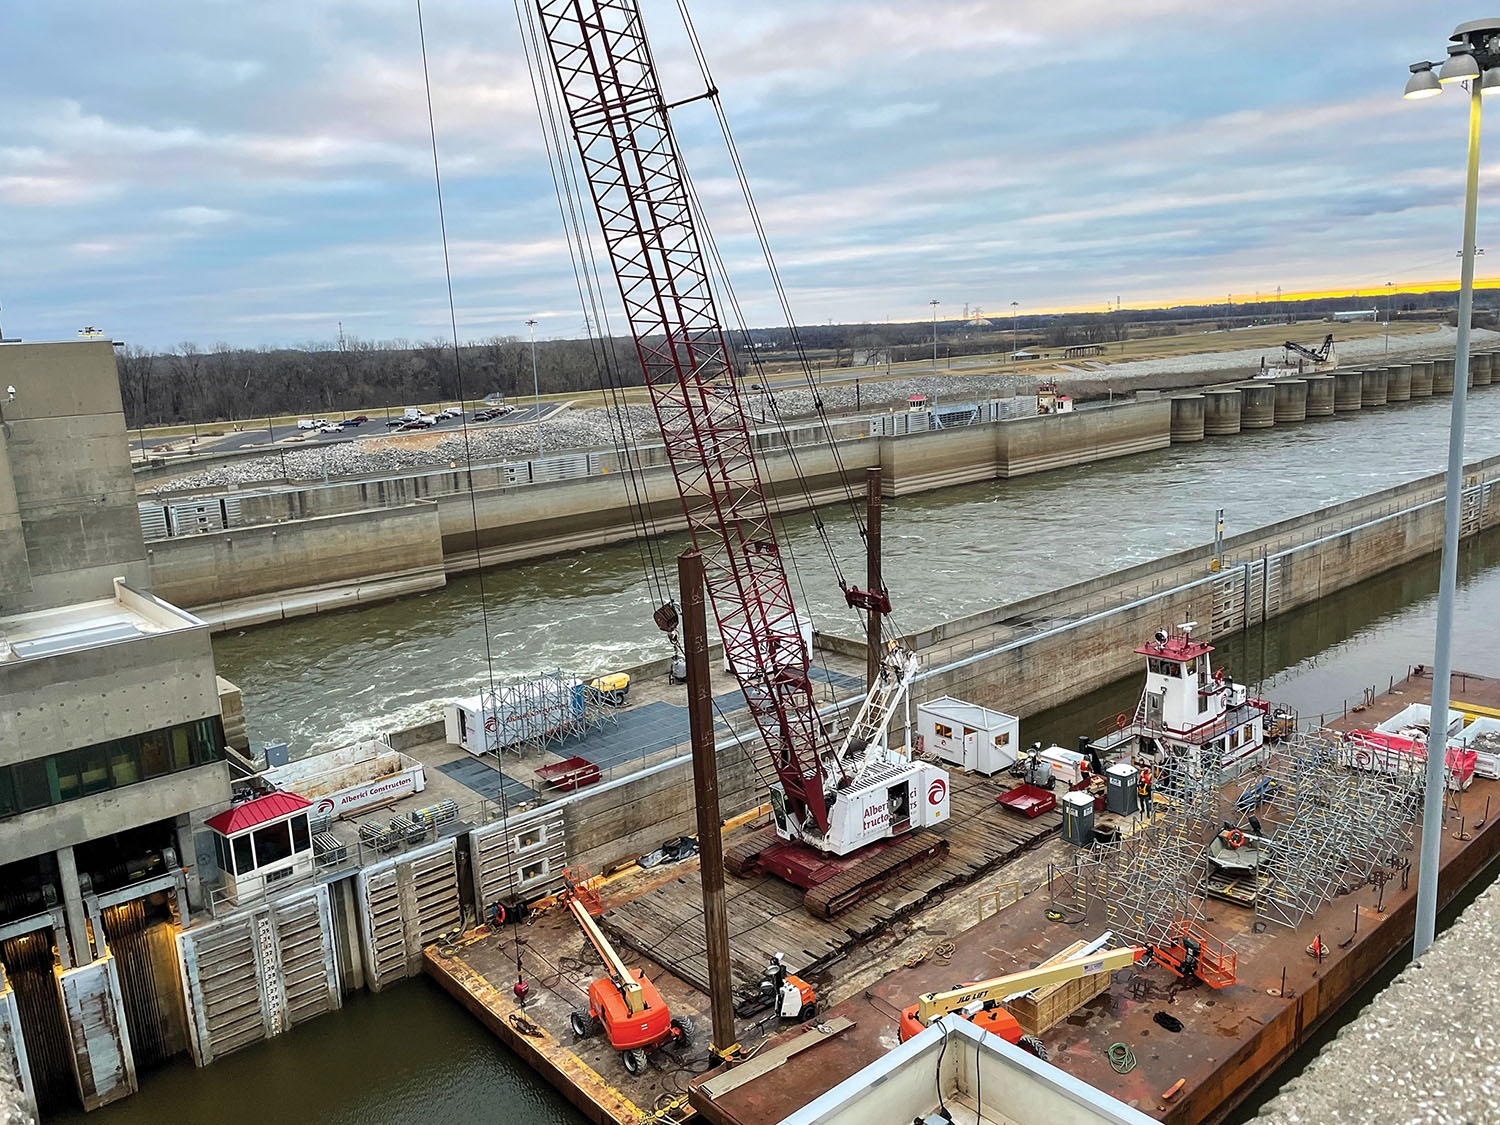 Barge equipment is positioned for work on the overlook structure at Mel Price Lock and Dam near St. Louis. Alberici Constructors team members will remove and replace two overlook structures so that the lift gates at Mel Price can be replaced sometime next year. (Photo courtesy of Alberici Constructors Inc.)